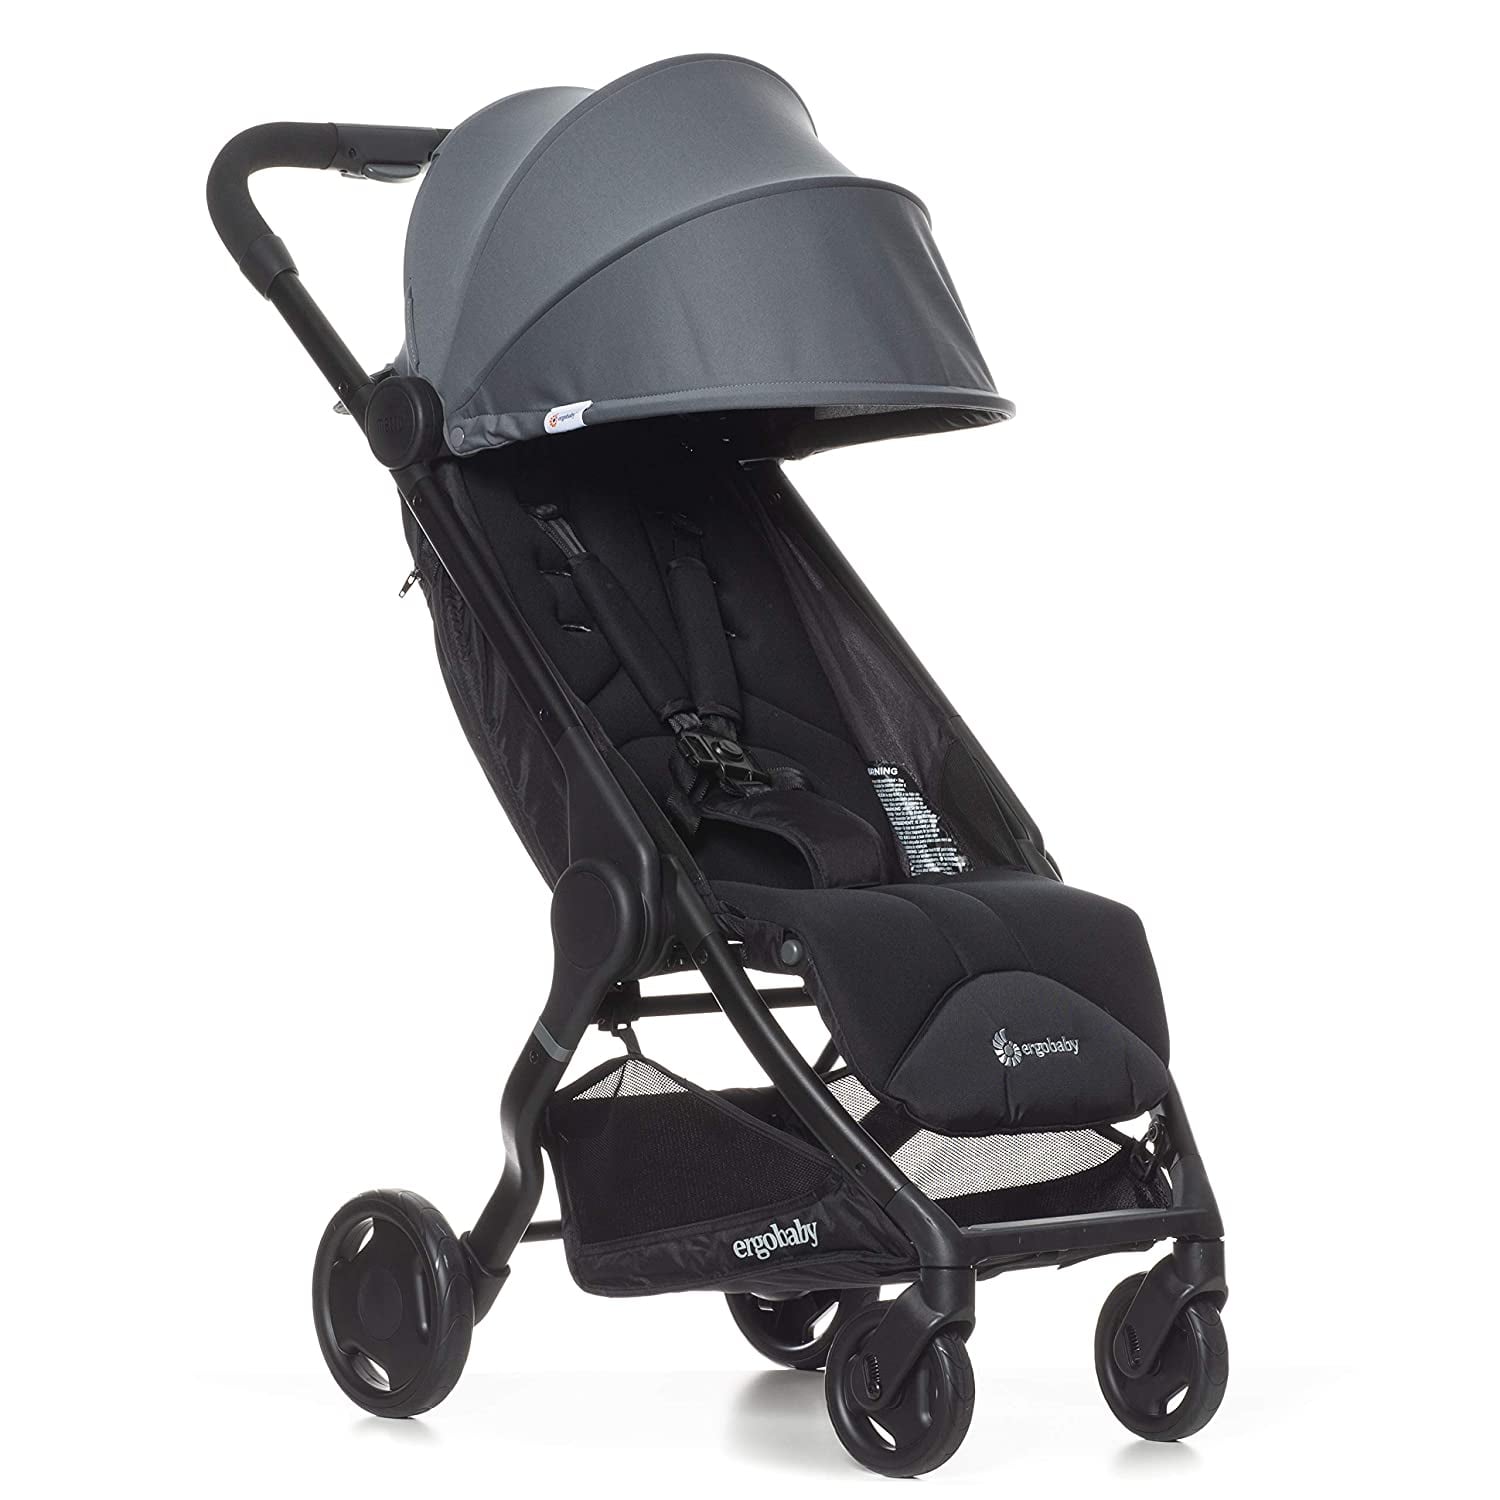 <p><a href="http://ergobaby.com/strollers/metro-stroller?click=sem&gclid=CjwKCAjwoIqhBhAGEiwArXT7KwvGnW3wlsL3J-tTpuwTDJ_iYoNfIVI55hZX2uSyBmpRKcPCbJdxVRoC5bAQAvD_BwE">BUY NOW</a></p><p>$299</p><p><strong><a href="http://ergobaby.com/strollers/metro-stroller?click=sem&gclid=CjwKCAjwoIqhBhAGEiwArXT7KwvGnW3wlsL3J-tTpuwTDJ_iYoNfIVI55hZX2uSyBmpRKcPCbJdxVRoC5bAQAvD_BwE" class="ga-track">Ergobaby Metro+ Compact Stroller</a> ($299) </strong></p> <p>This stroller is a must-have for city dwellers, those constantly on the go, and basically any parent who wants a stroller with a simple one-handed fold that leads to a small and lightweight bundle that's easy to bring onto public transportation, take in and out of cars, or store in an airplane overhead bin. It comes with black, gray (pictured), or blue and is super comfy for baby, so you certainly won't be sacrificing their comfort for a compact and sleek style.</p>